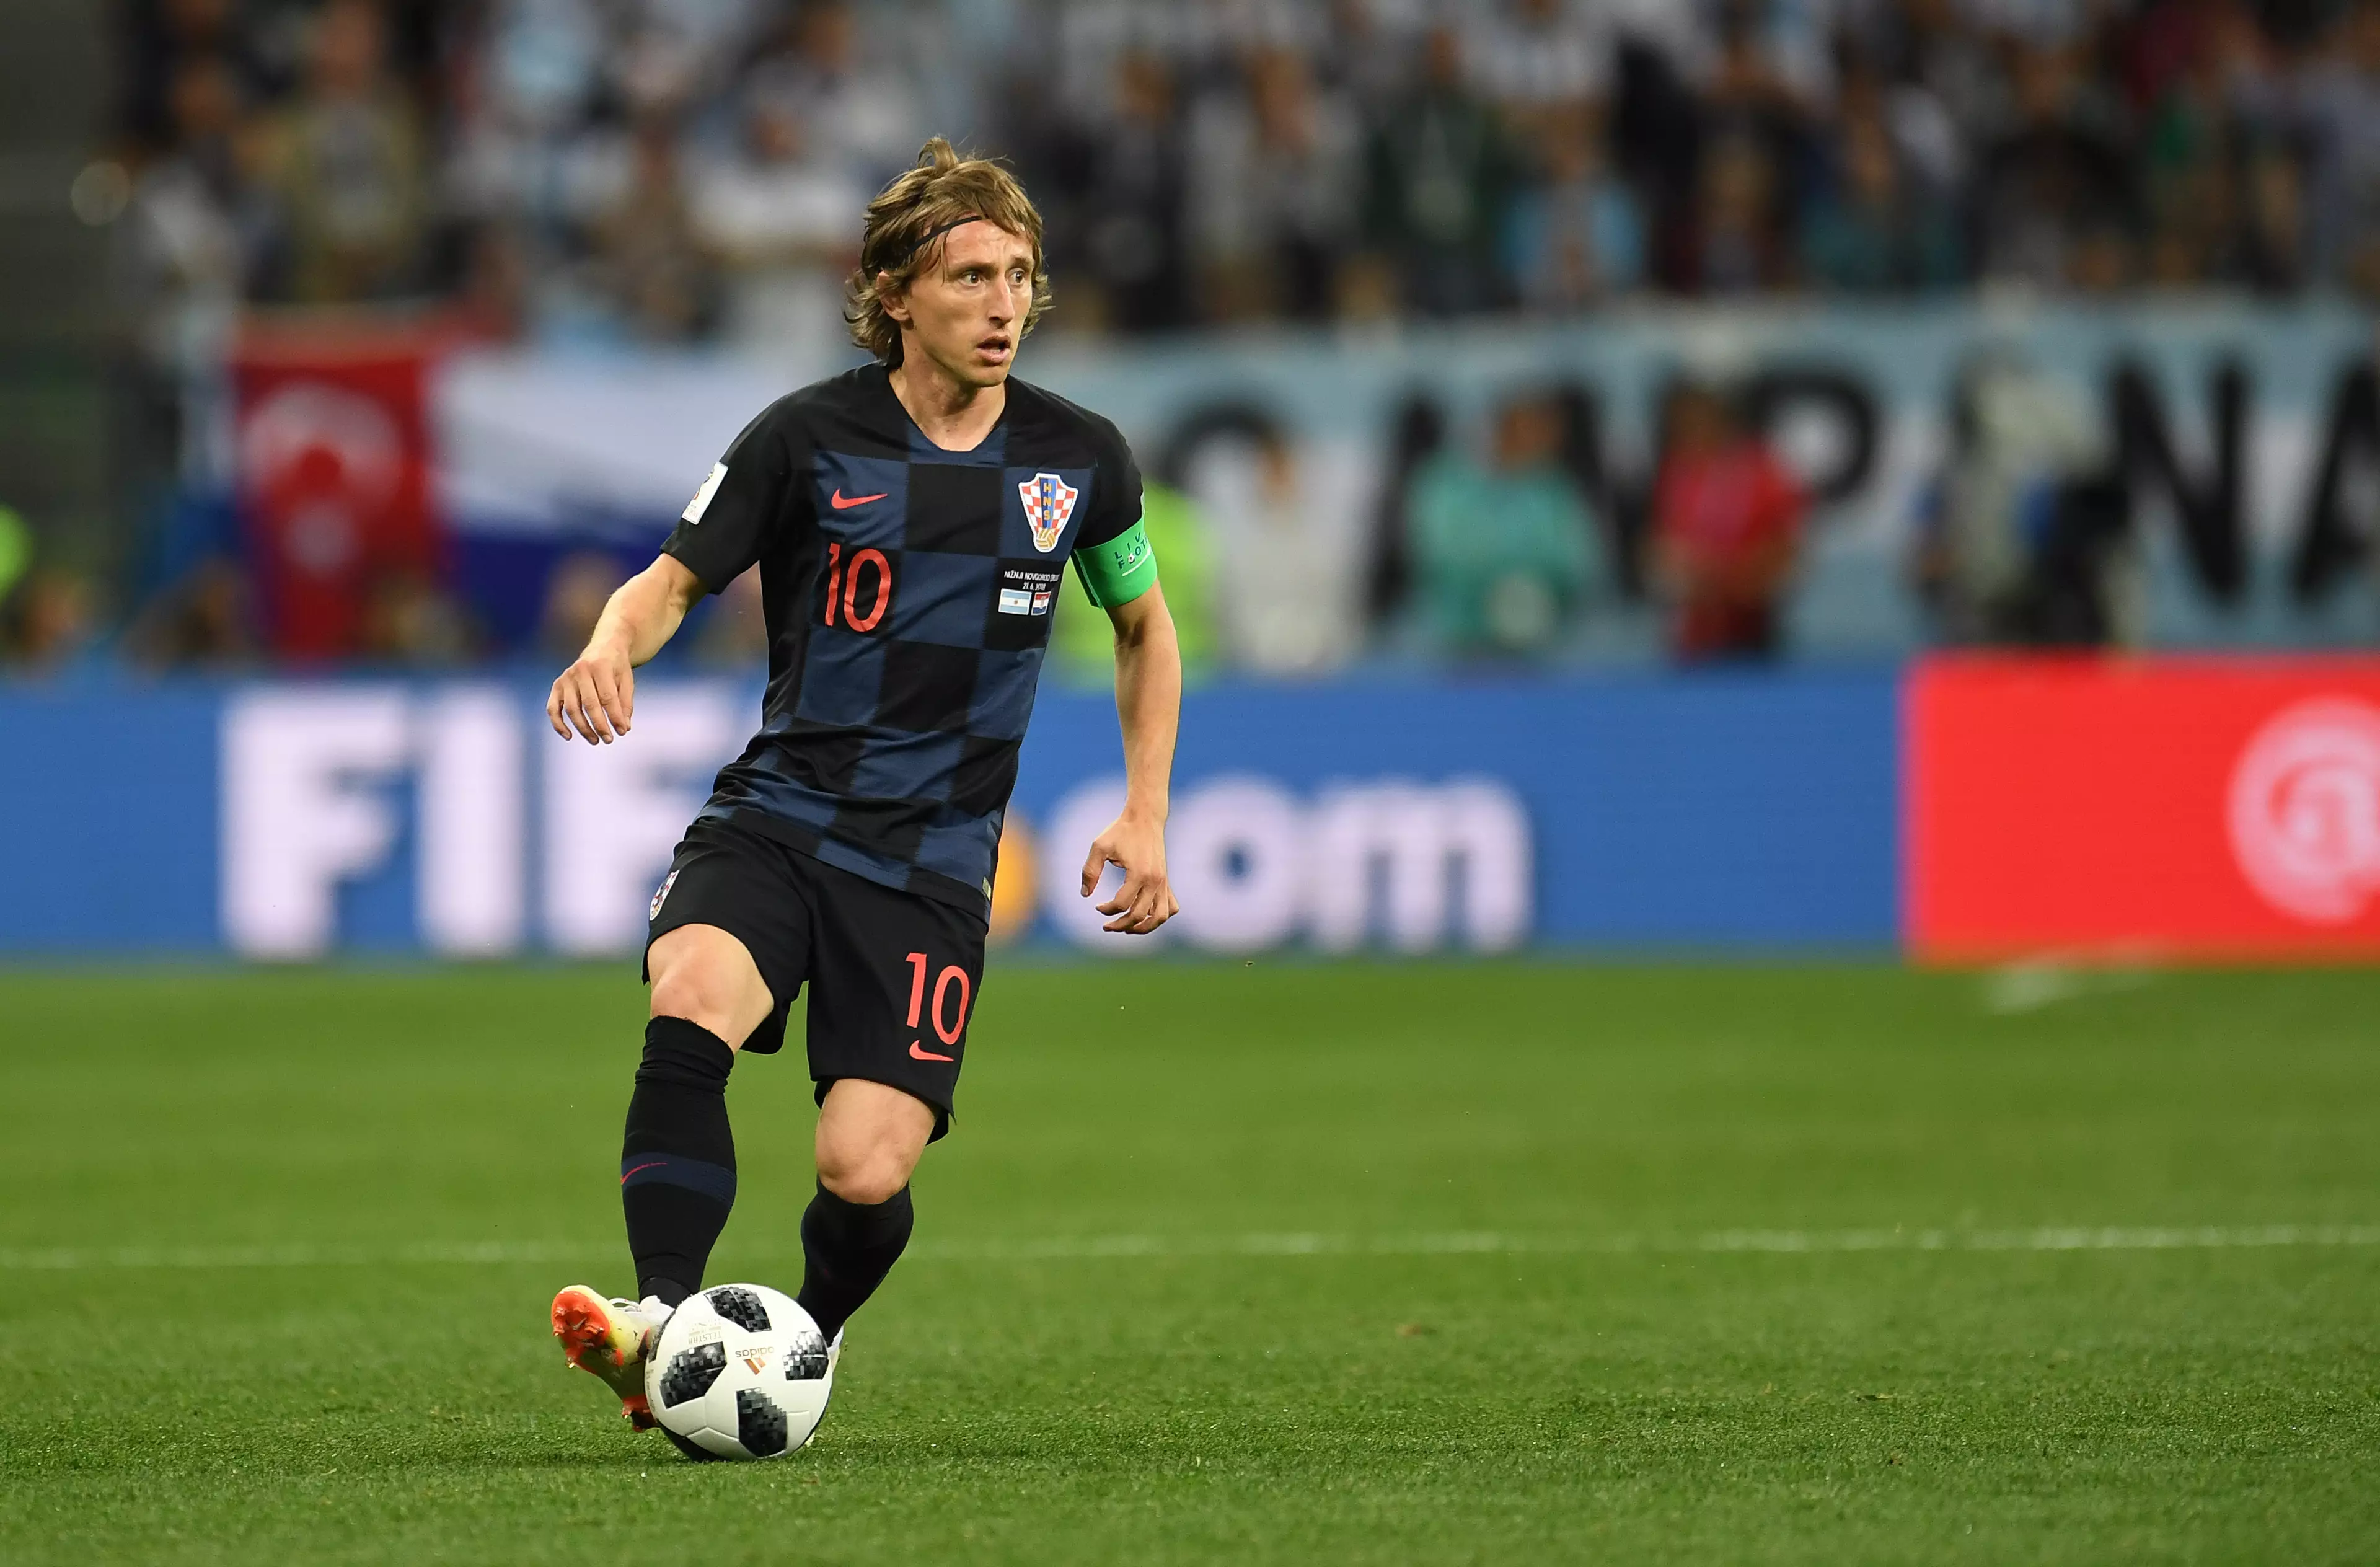 Modric could be a contender for this year's Ballon d'Or. Image: PA Images